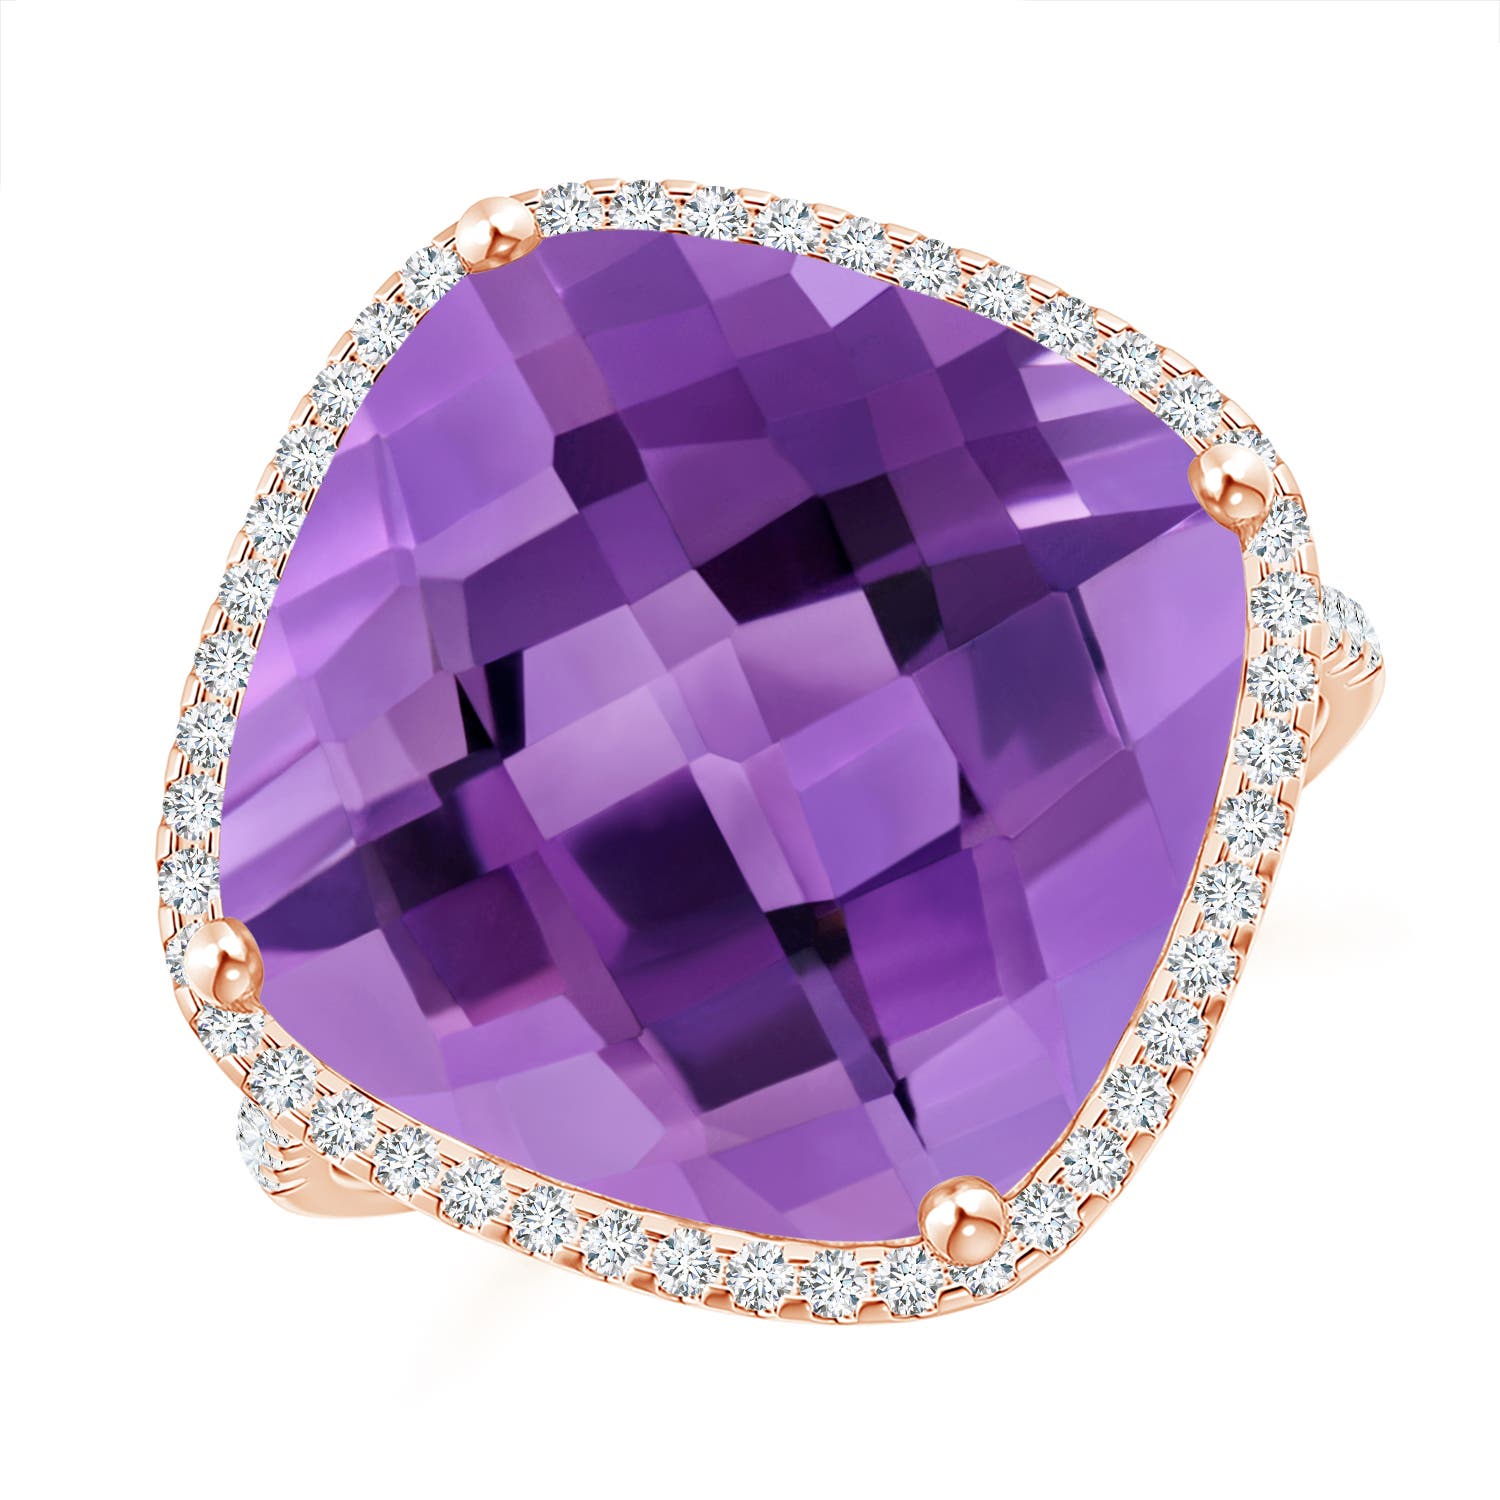 AA - Amethyst / 11.39 CT / 14 KT Rose Gold